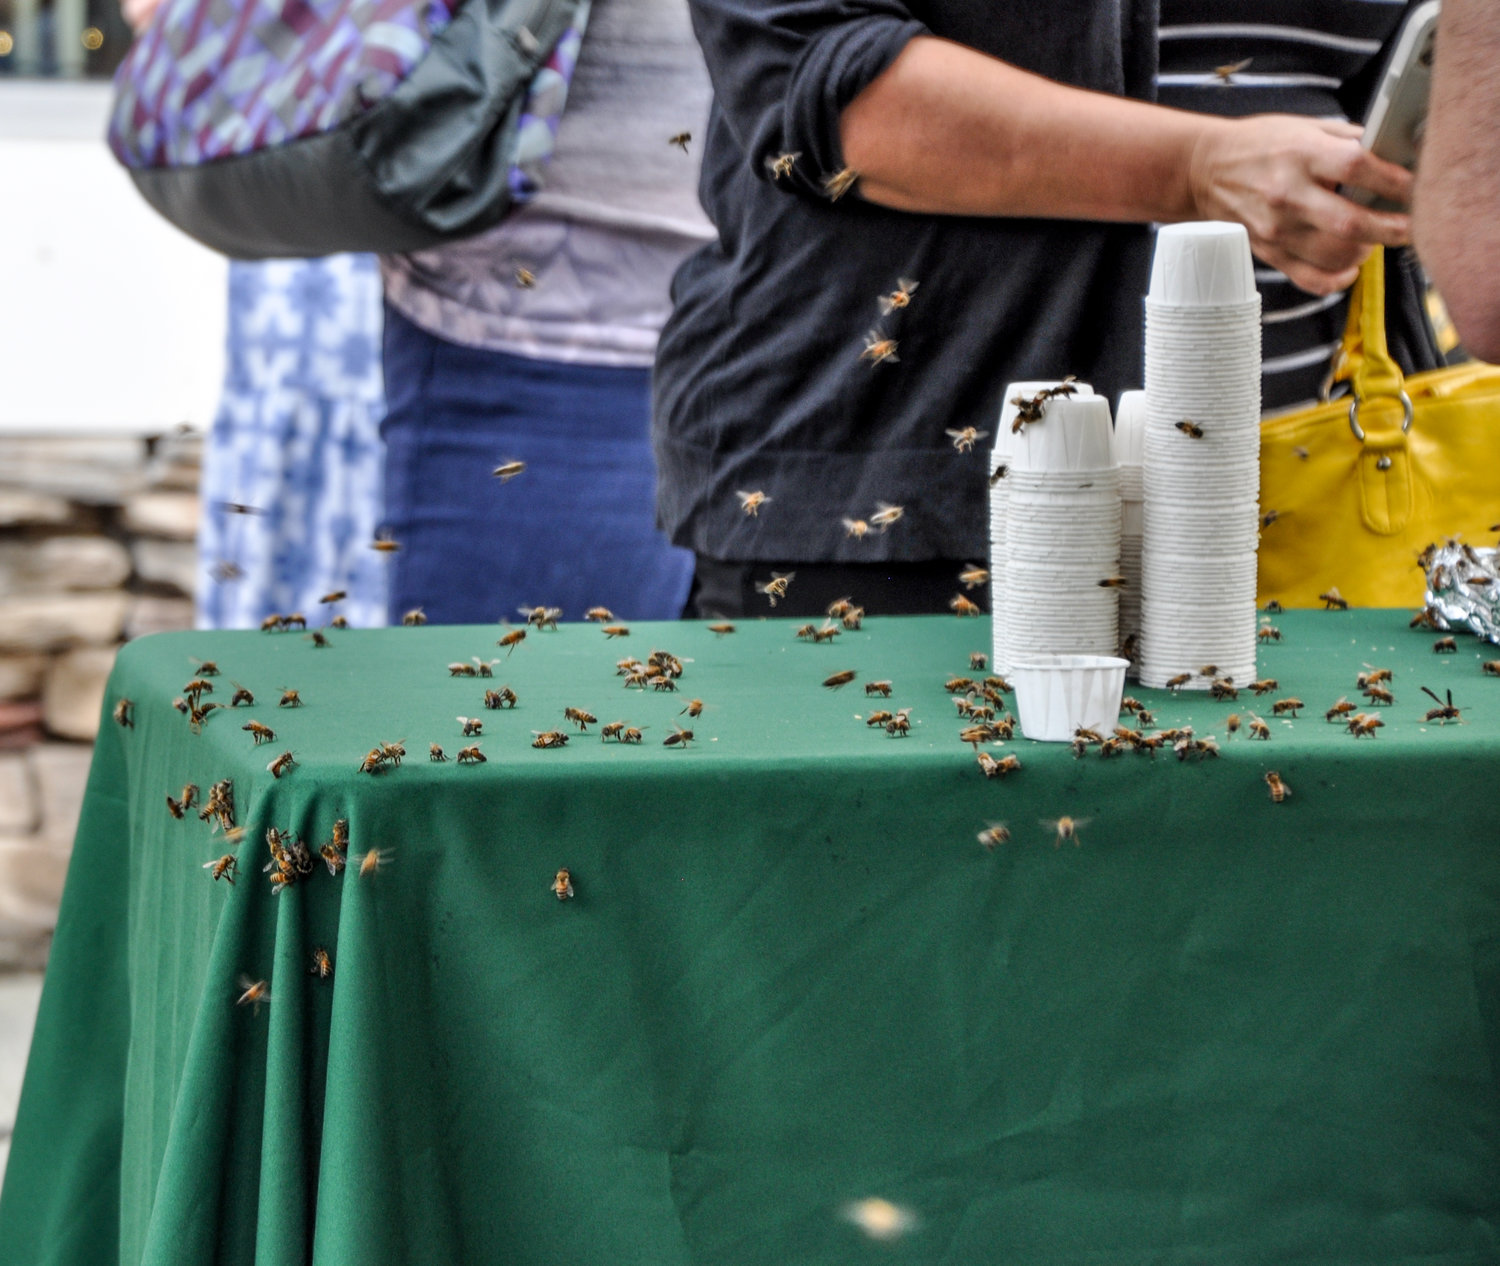 There will be bees at this weekend's festival in Narrowsburg. Count on it.